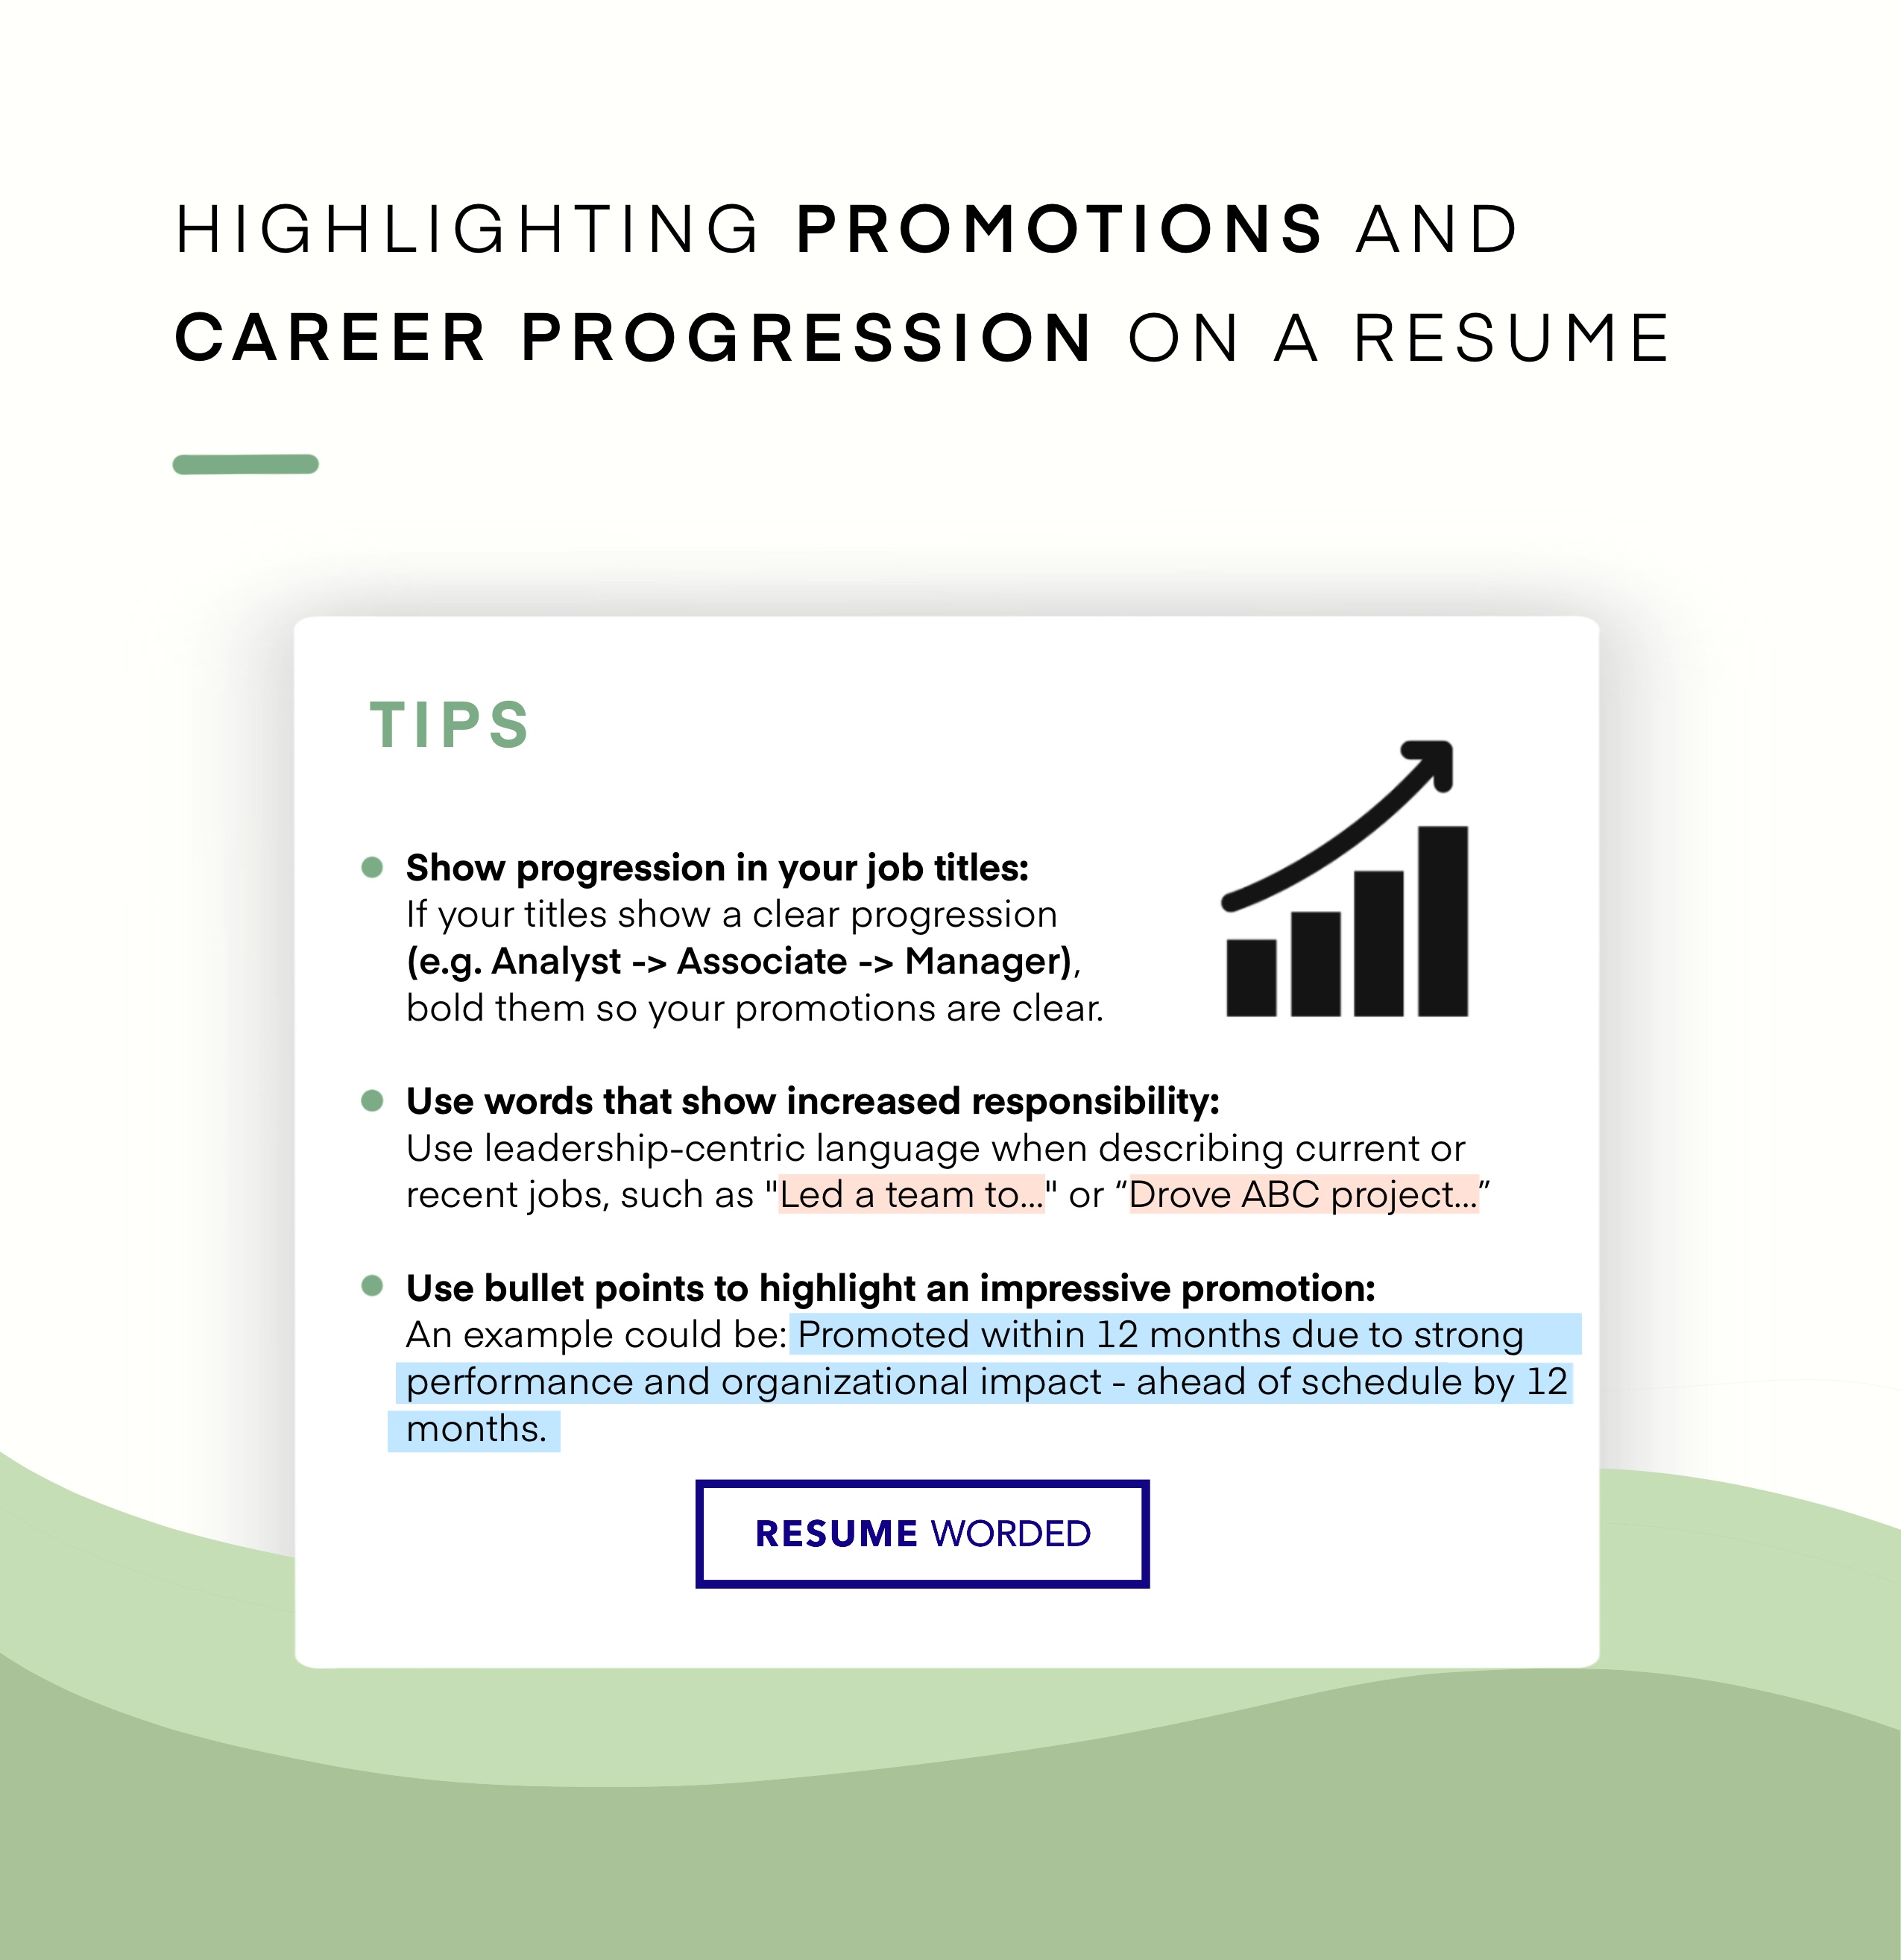 How to highlight career progression on your resume when you've just had one job or worked at one company